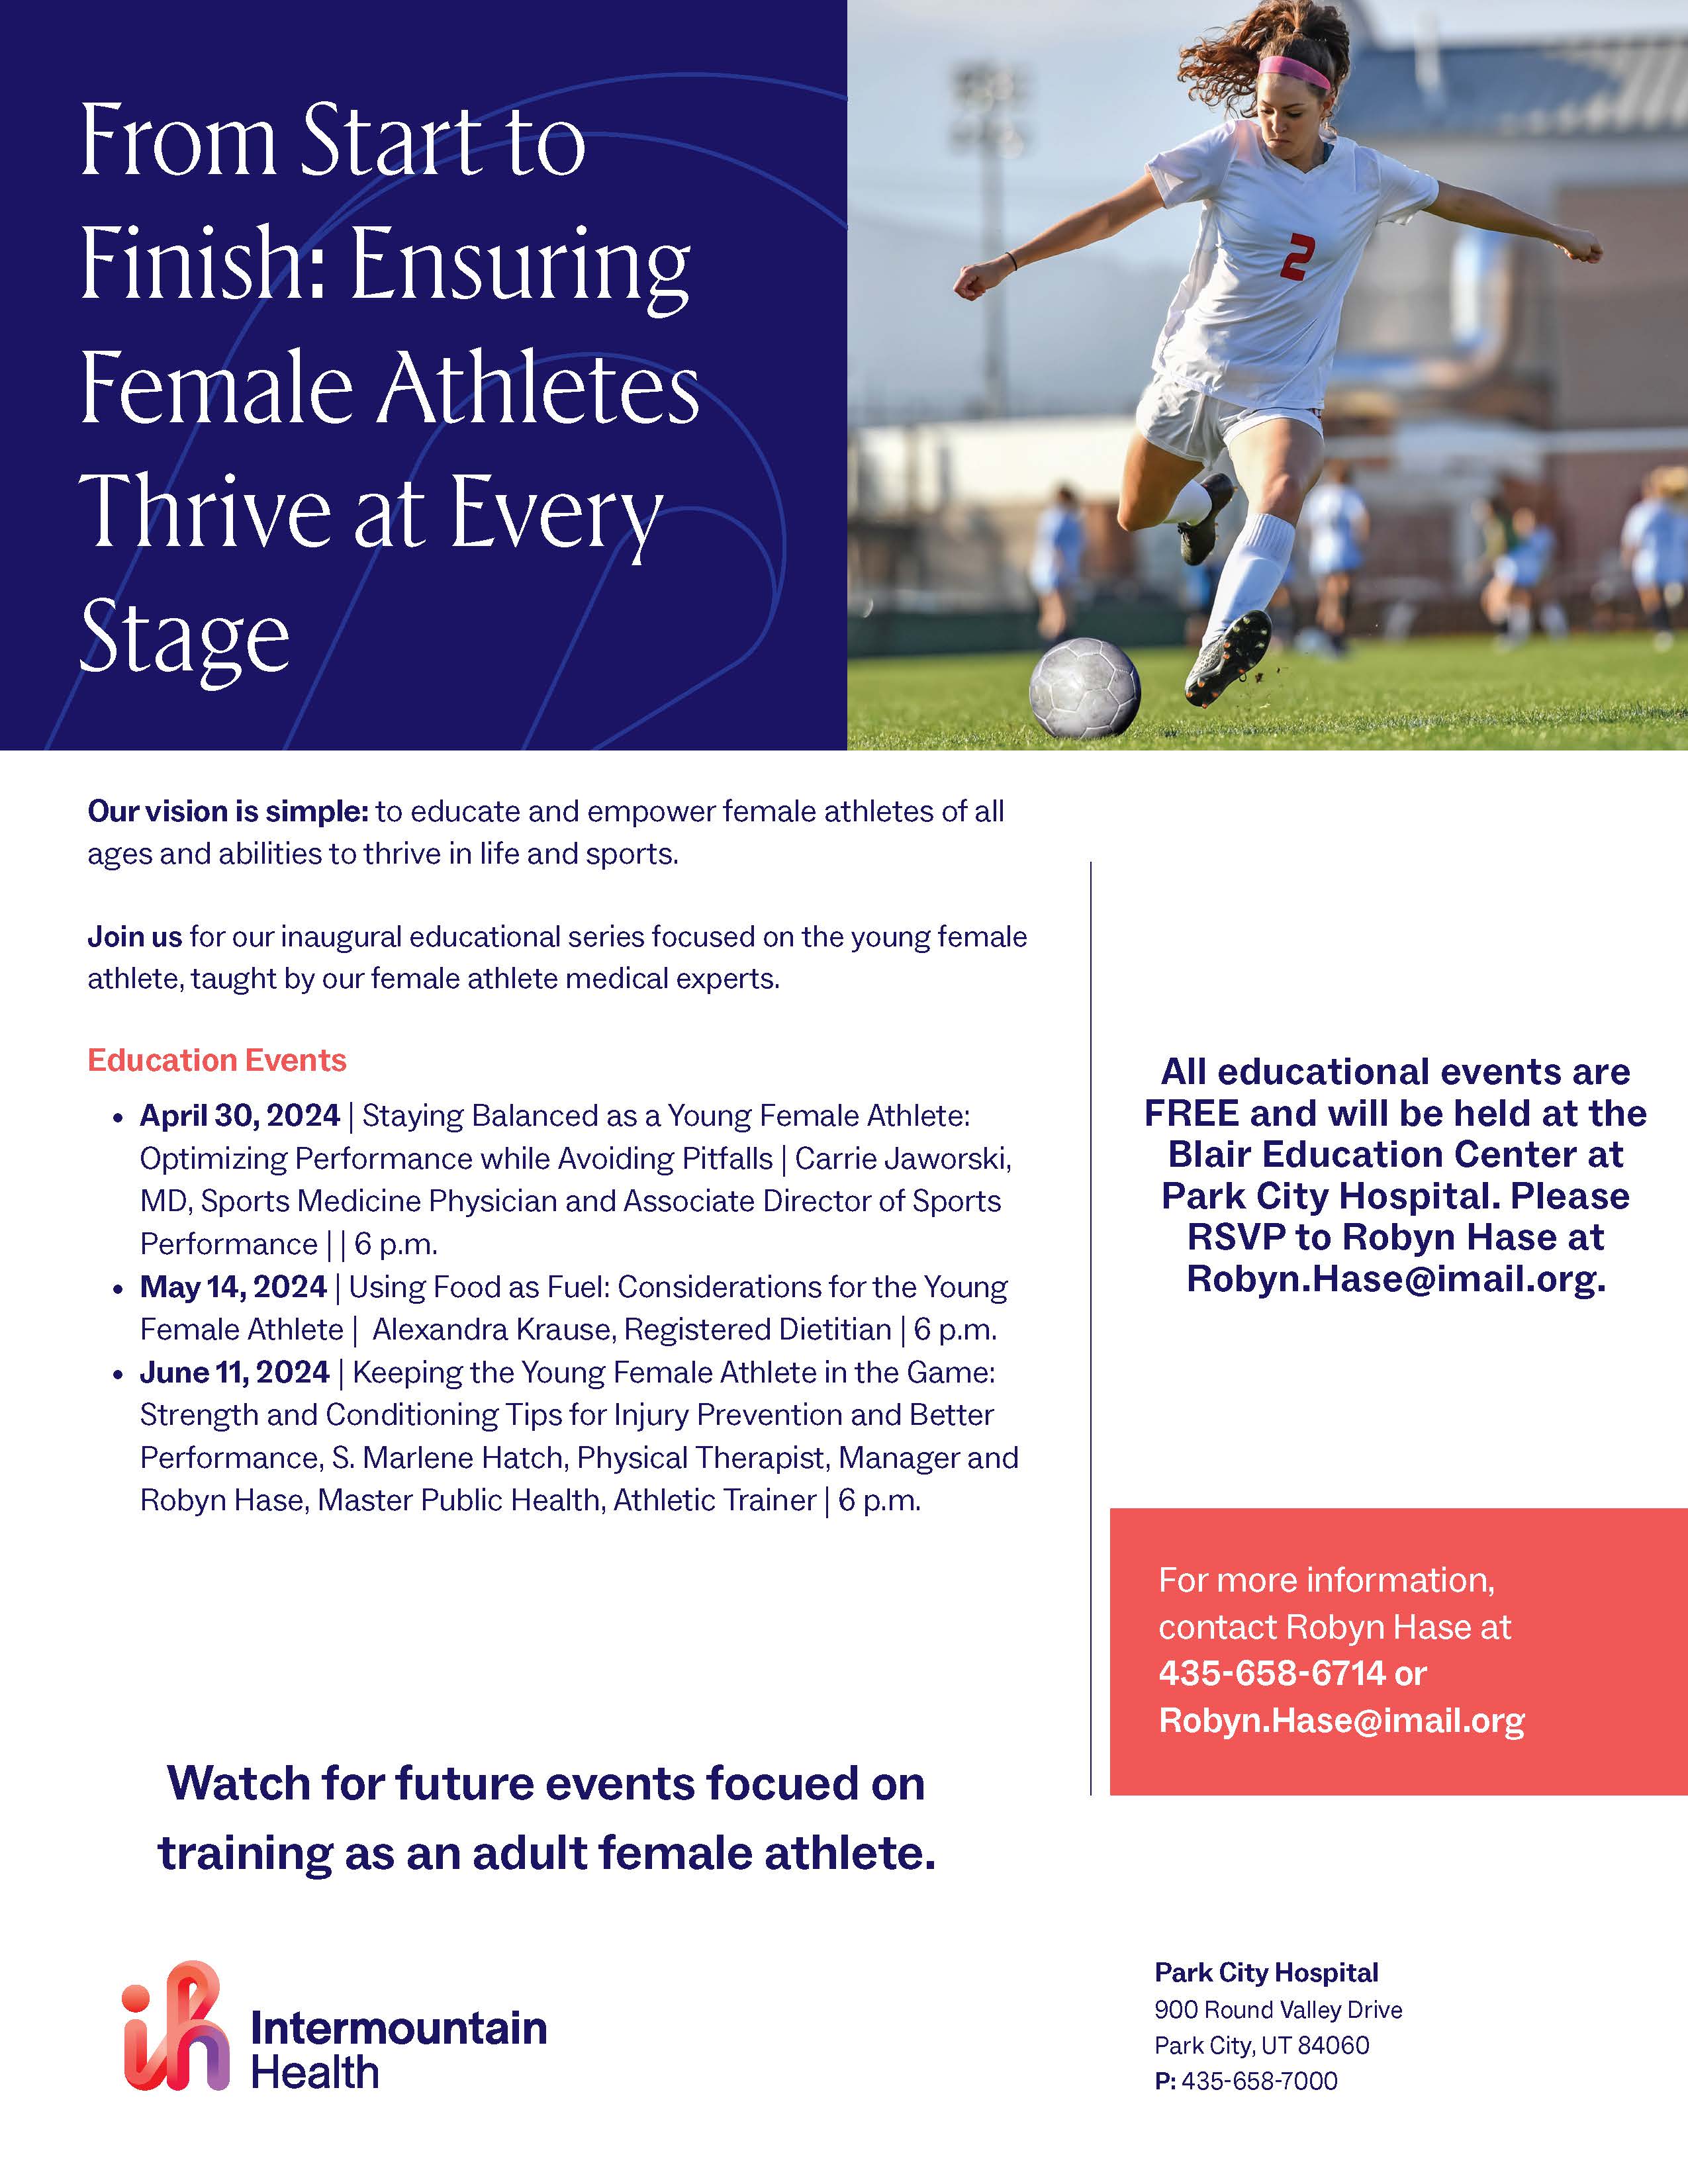 Female Athletes lectures